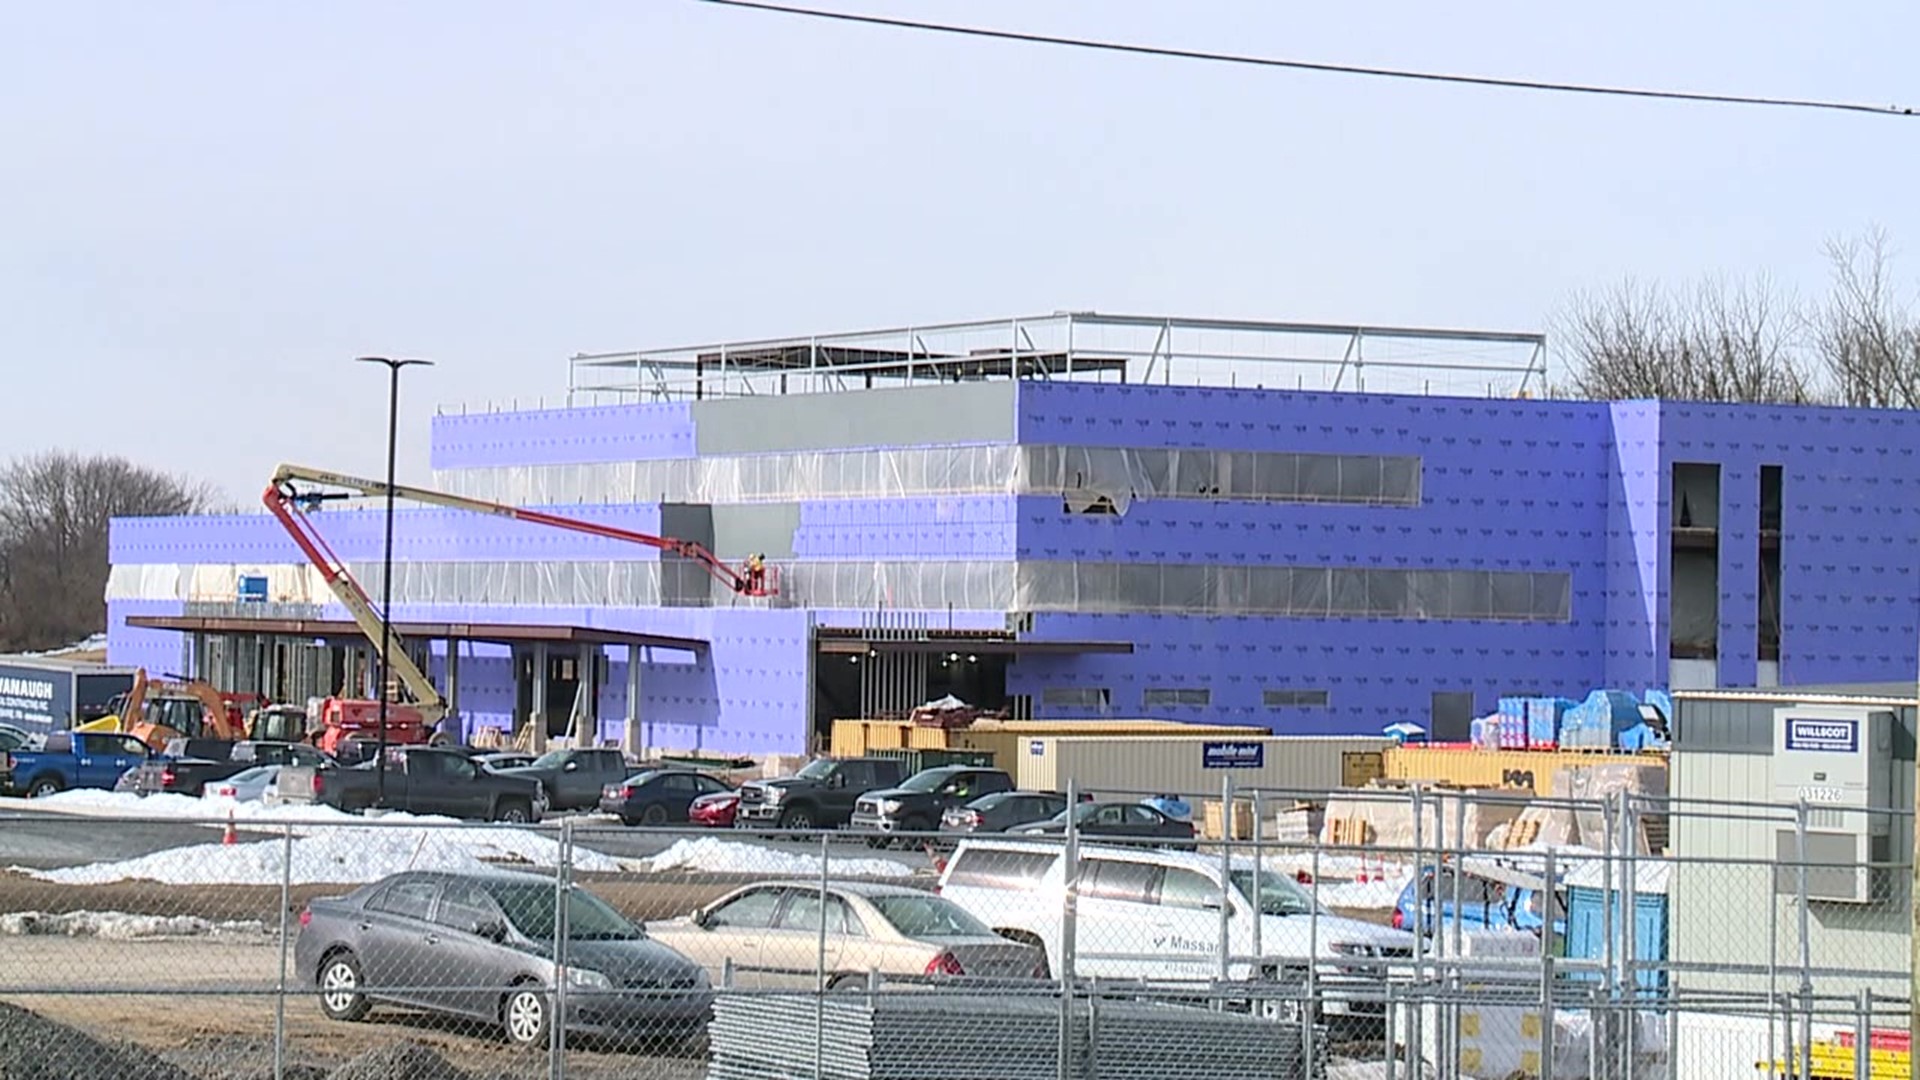 The new healthplex, with an emergency department, operating suite, and 20 inpatient beds, is expected to be completed by the fall.